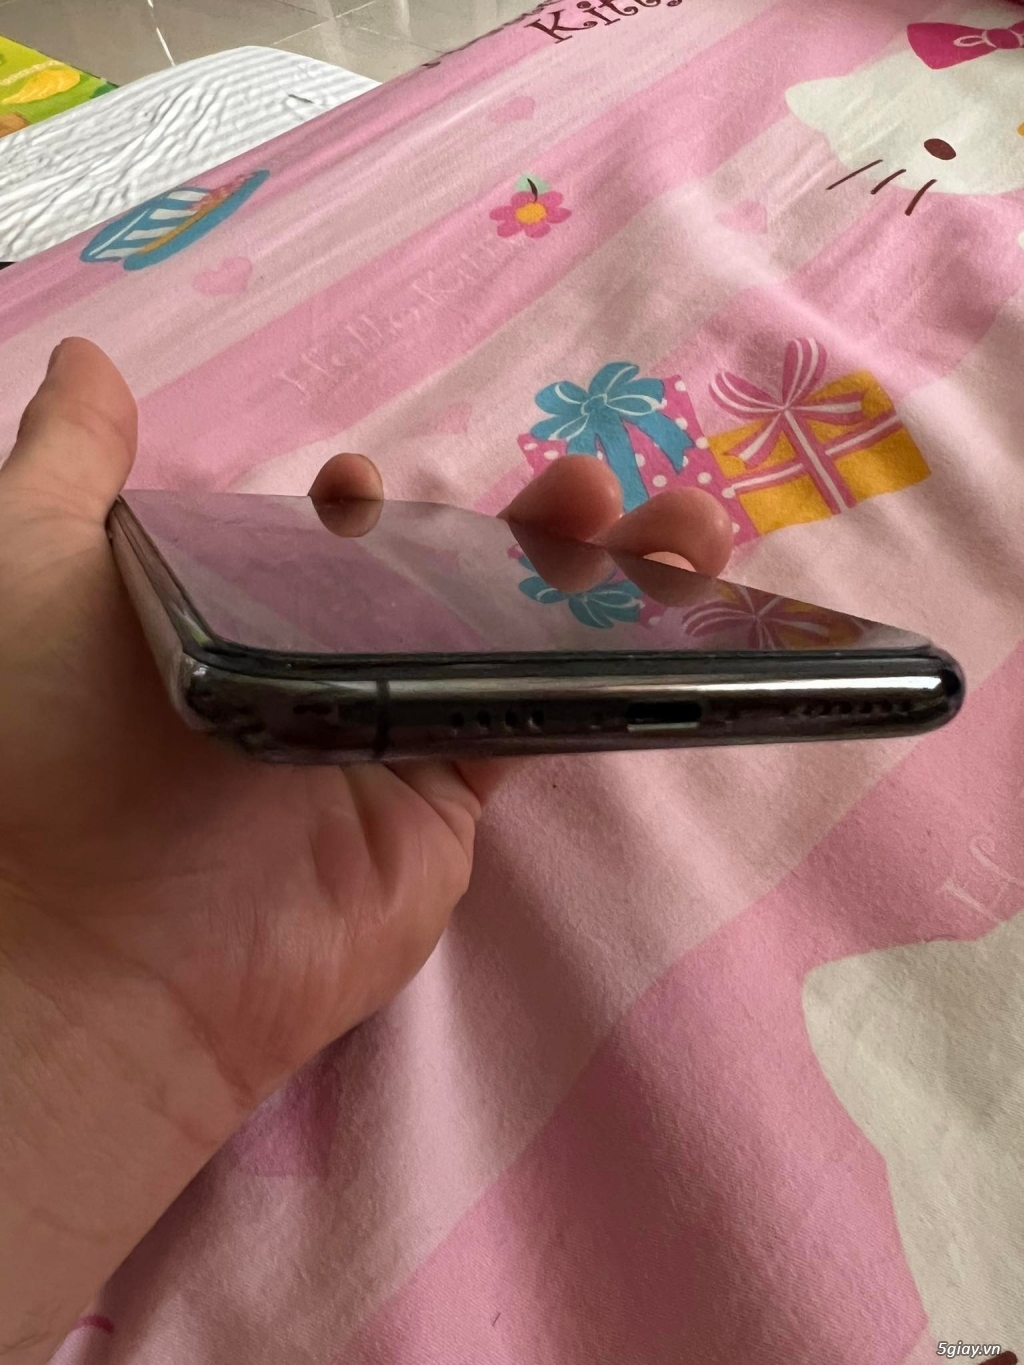 BÁN IPHONE 11 PRO MAX 256GB MỸ USED - 7